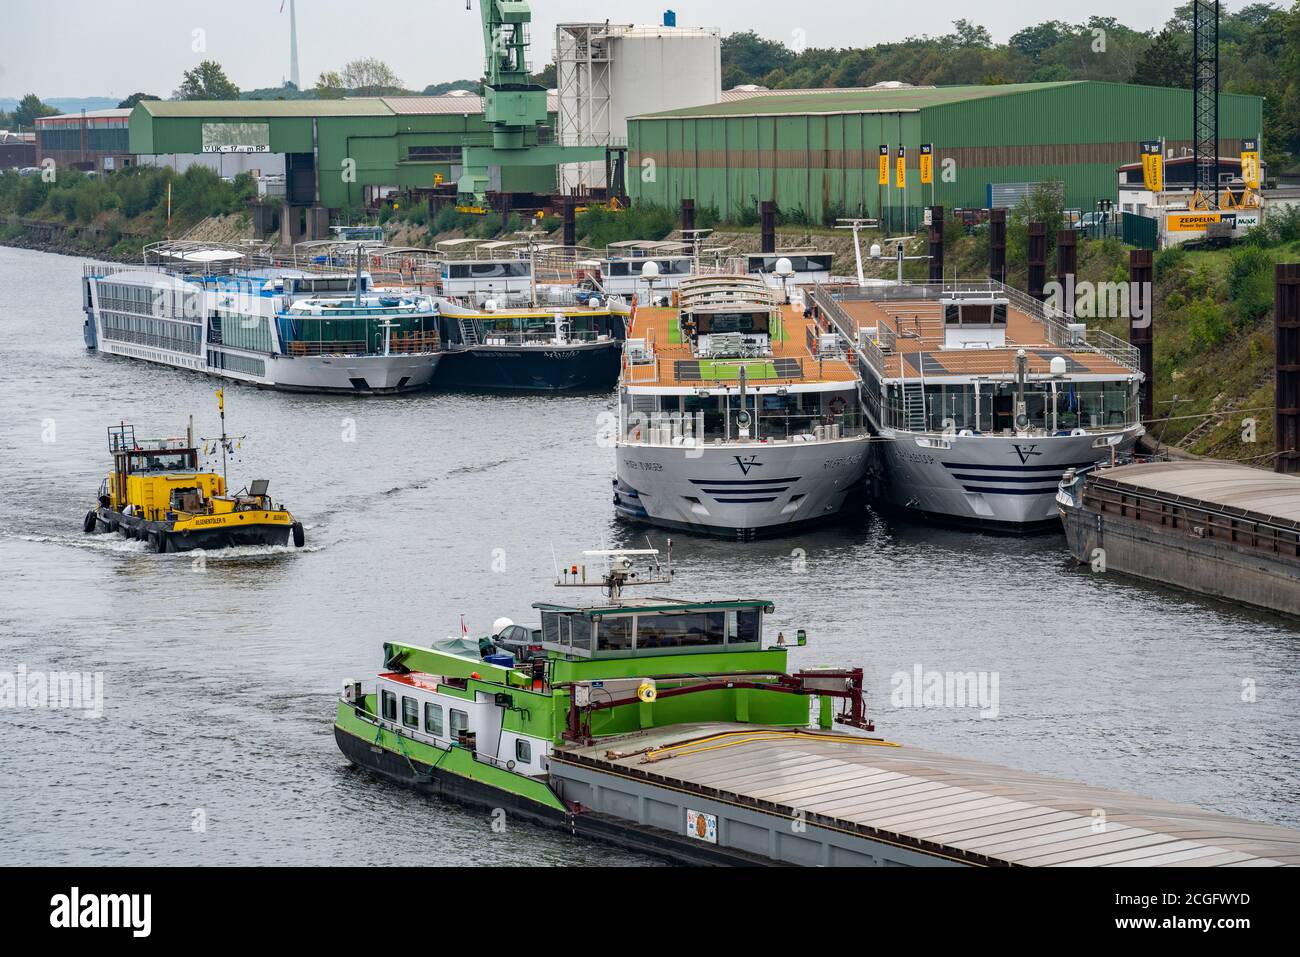 River cruise ships of various shipping companies are anchored in Duisburg's Ruhrort Port, they are not needed due to declining passenger numbers durin Stock Photo